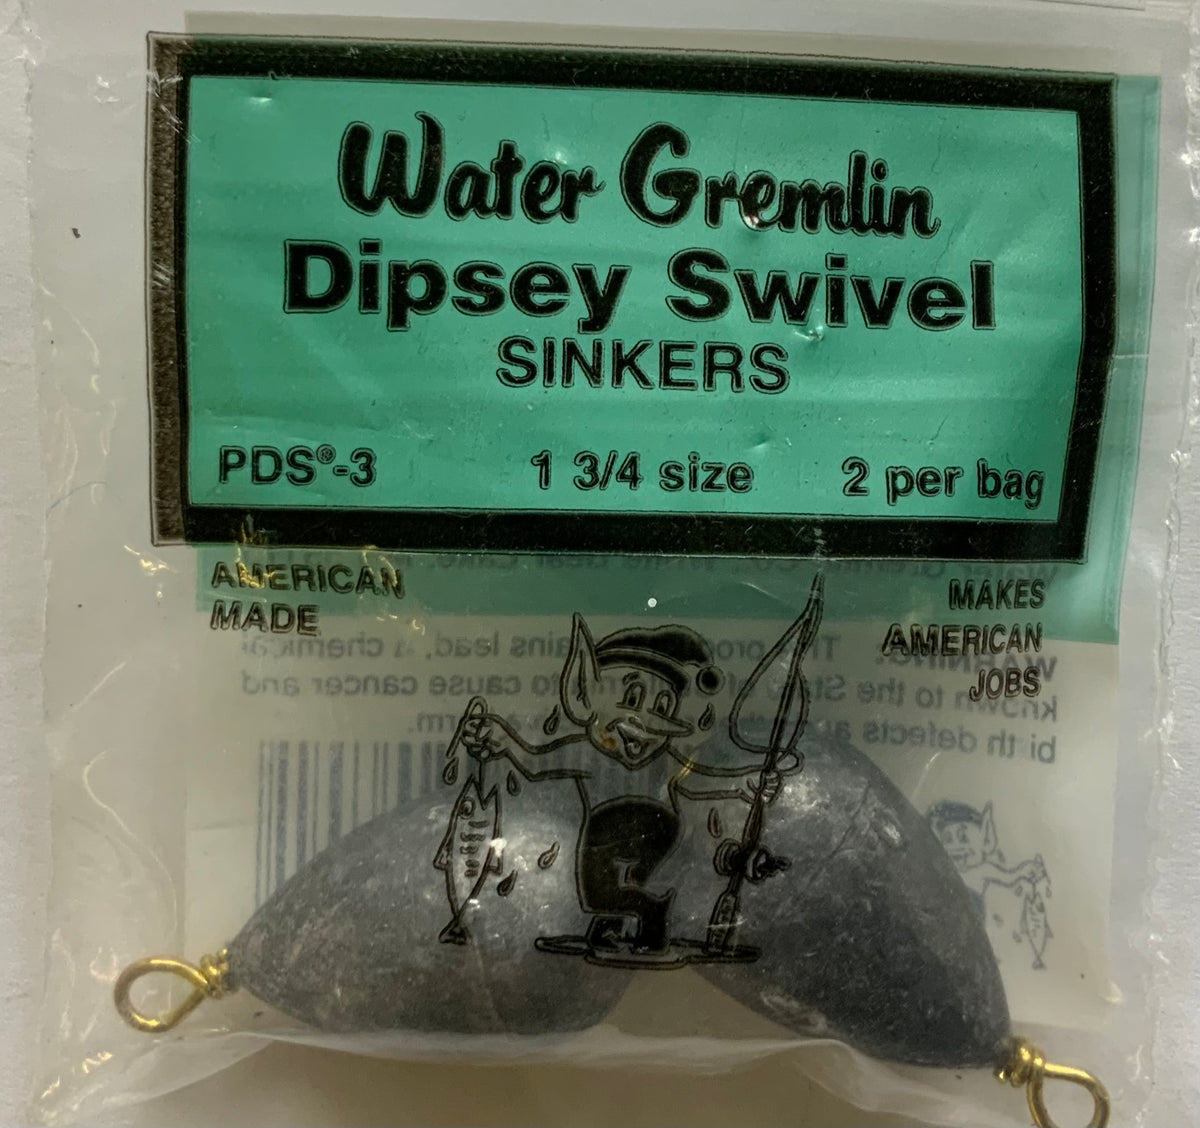 Dipsey Swivel 2 pack 1 3/4oz – The Crappie Store, Dresden ON